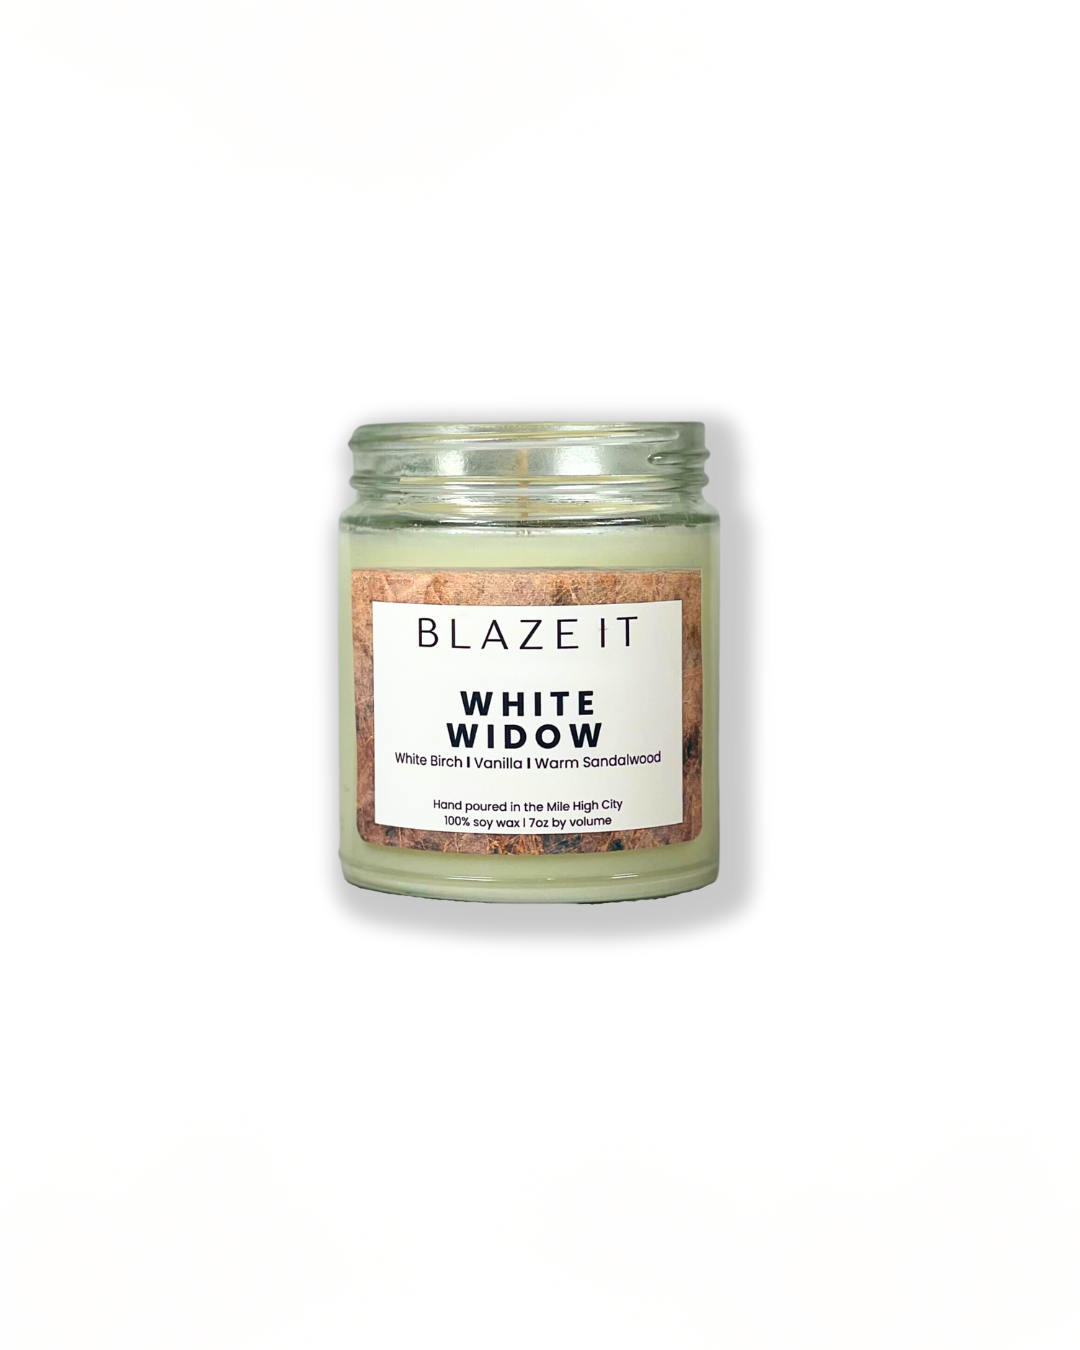 White Widow 7oz single wick candle with notes of White Birch, Vanilla and Warm Sandalwood